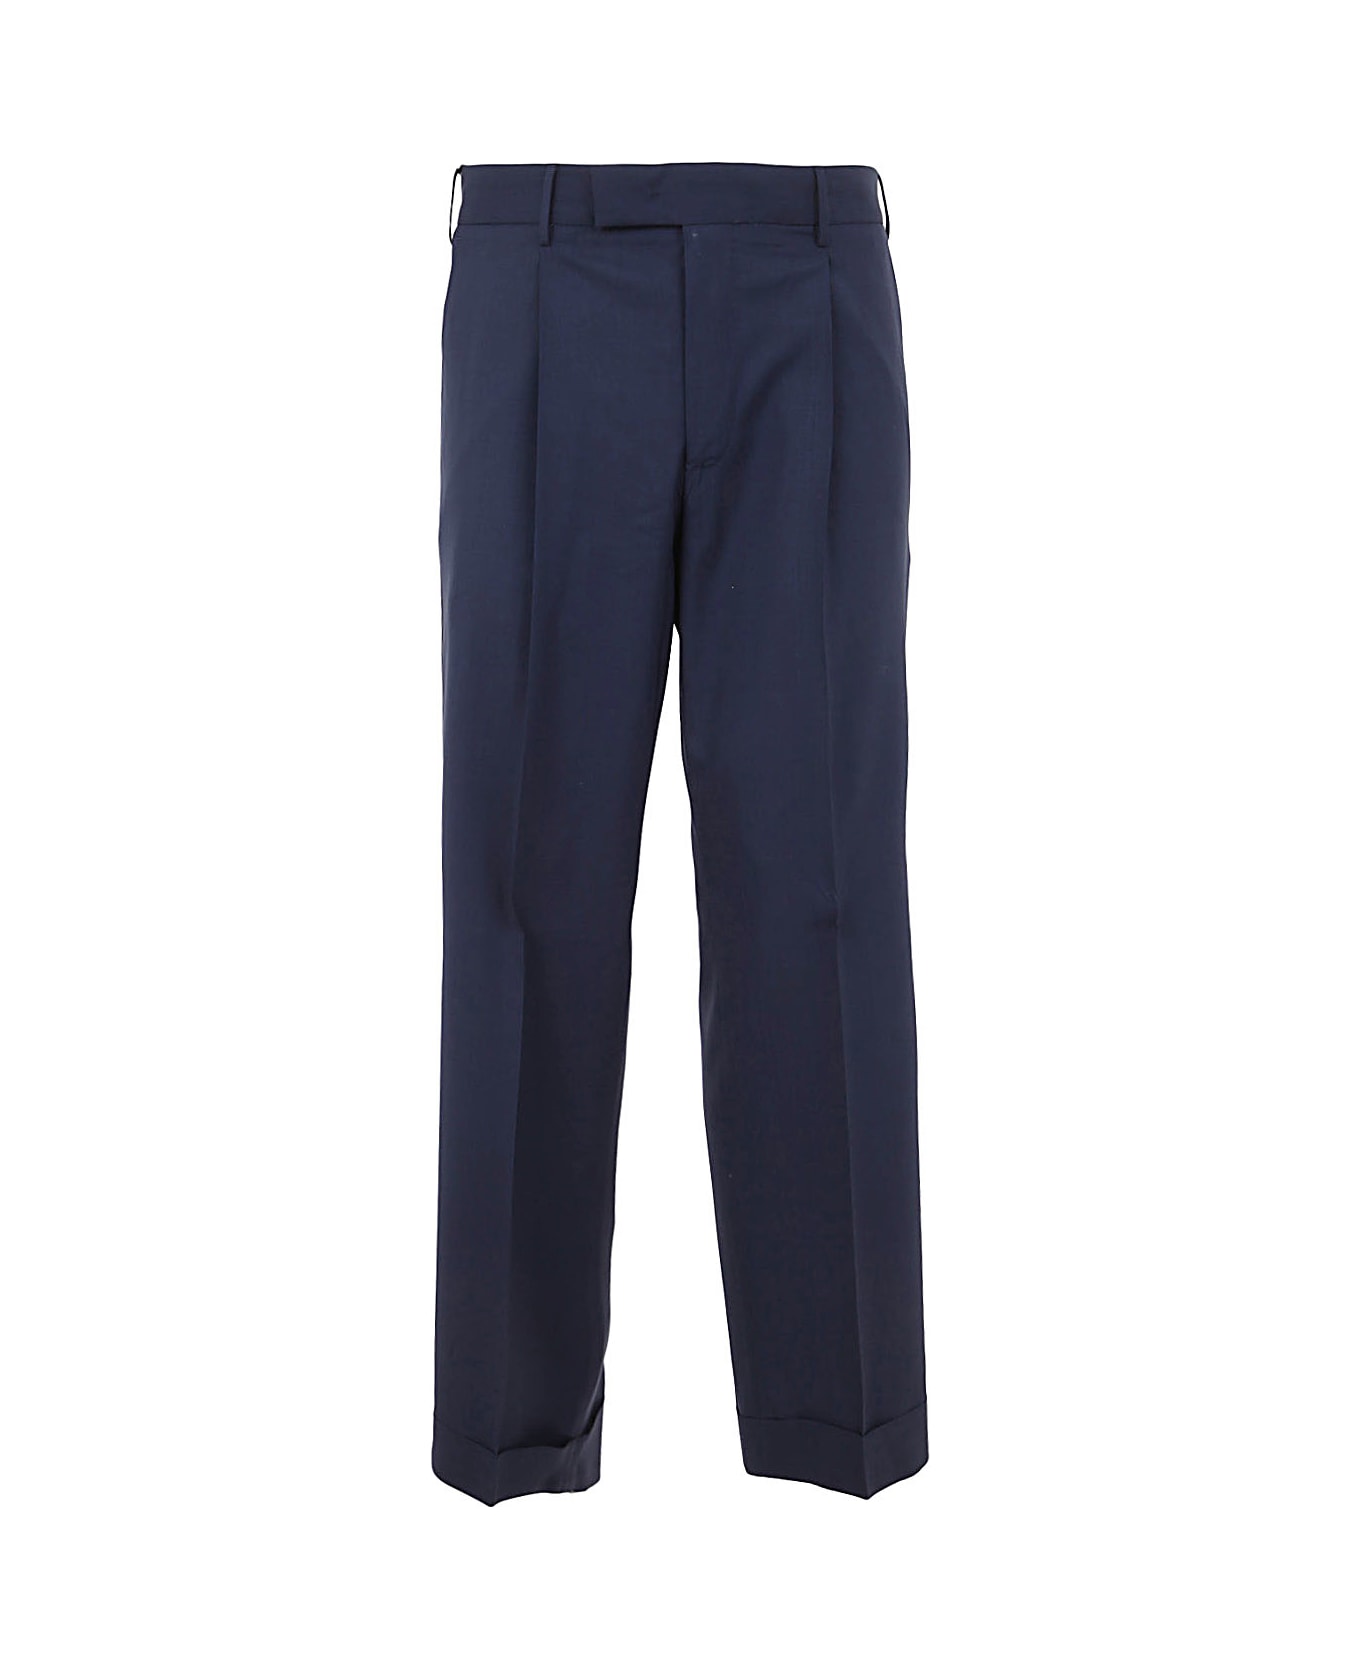 PT Torino Man Trousers With Lapel And Pences - Navy Blue ボトムス